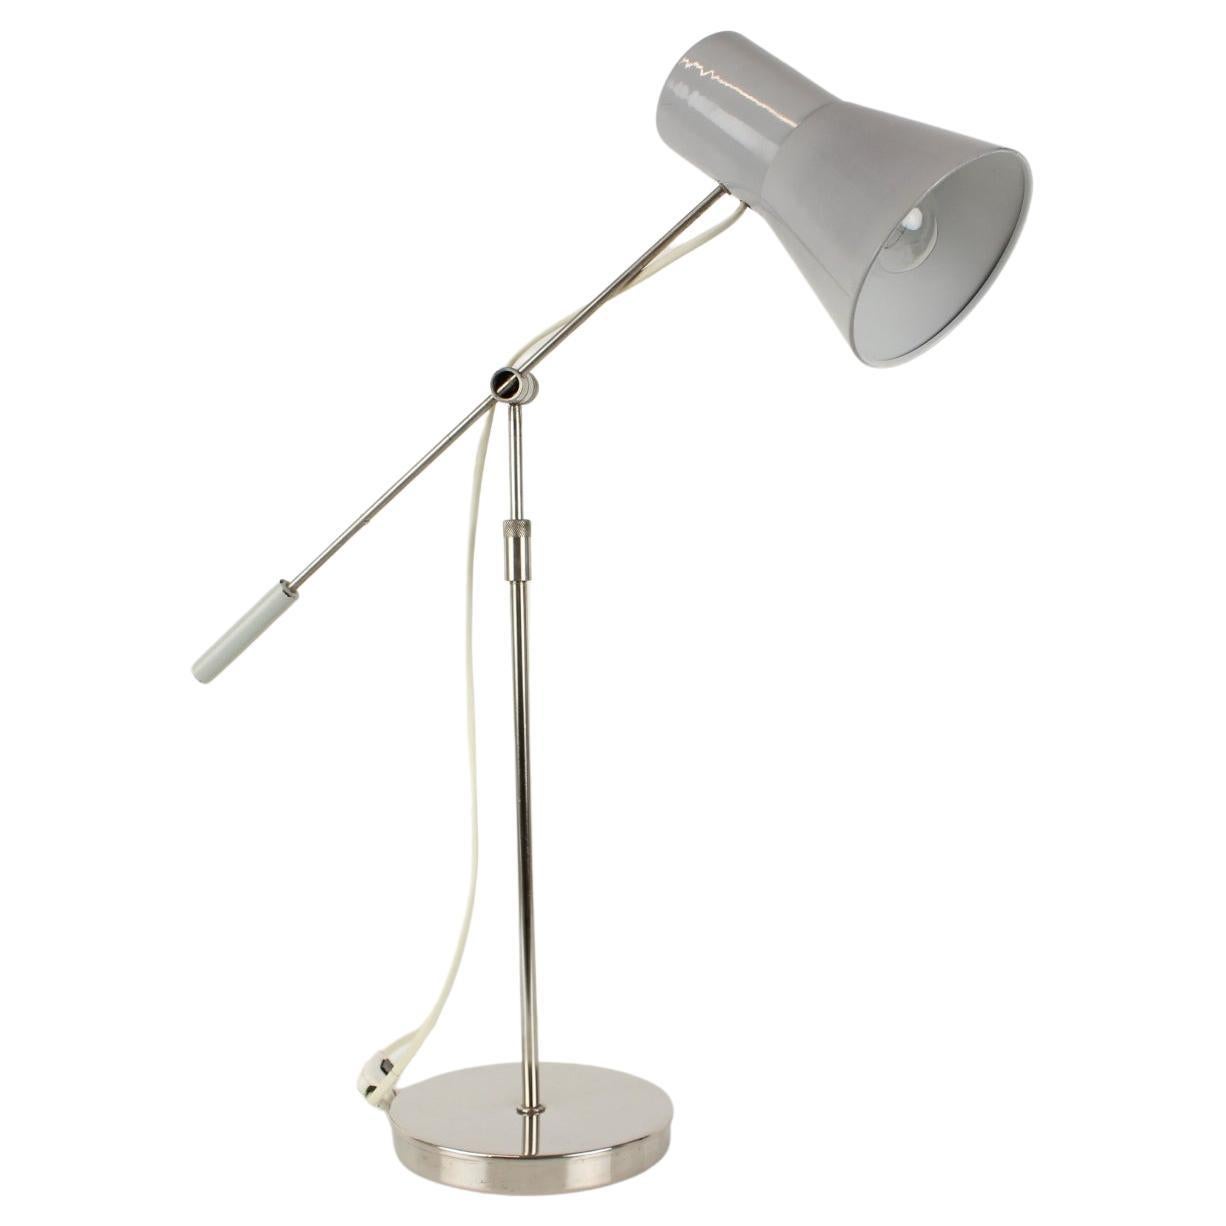 Made in Czechoslovakia
Made of Lacquered metal, chrome
1x75W, E27 or E26 bulb
Re-polished
Original condition
Height when fully extended 93cm
US adapter included.